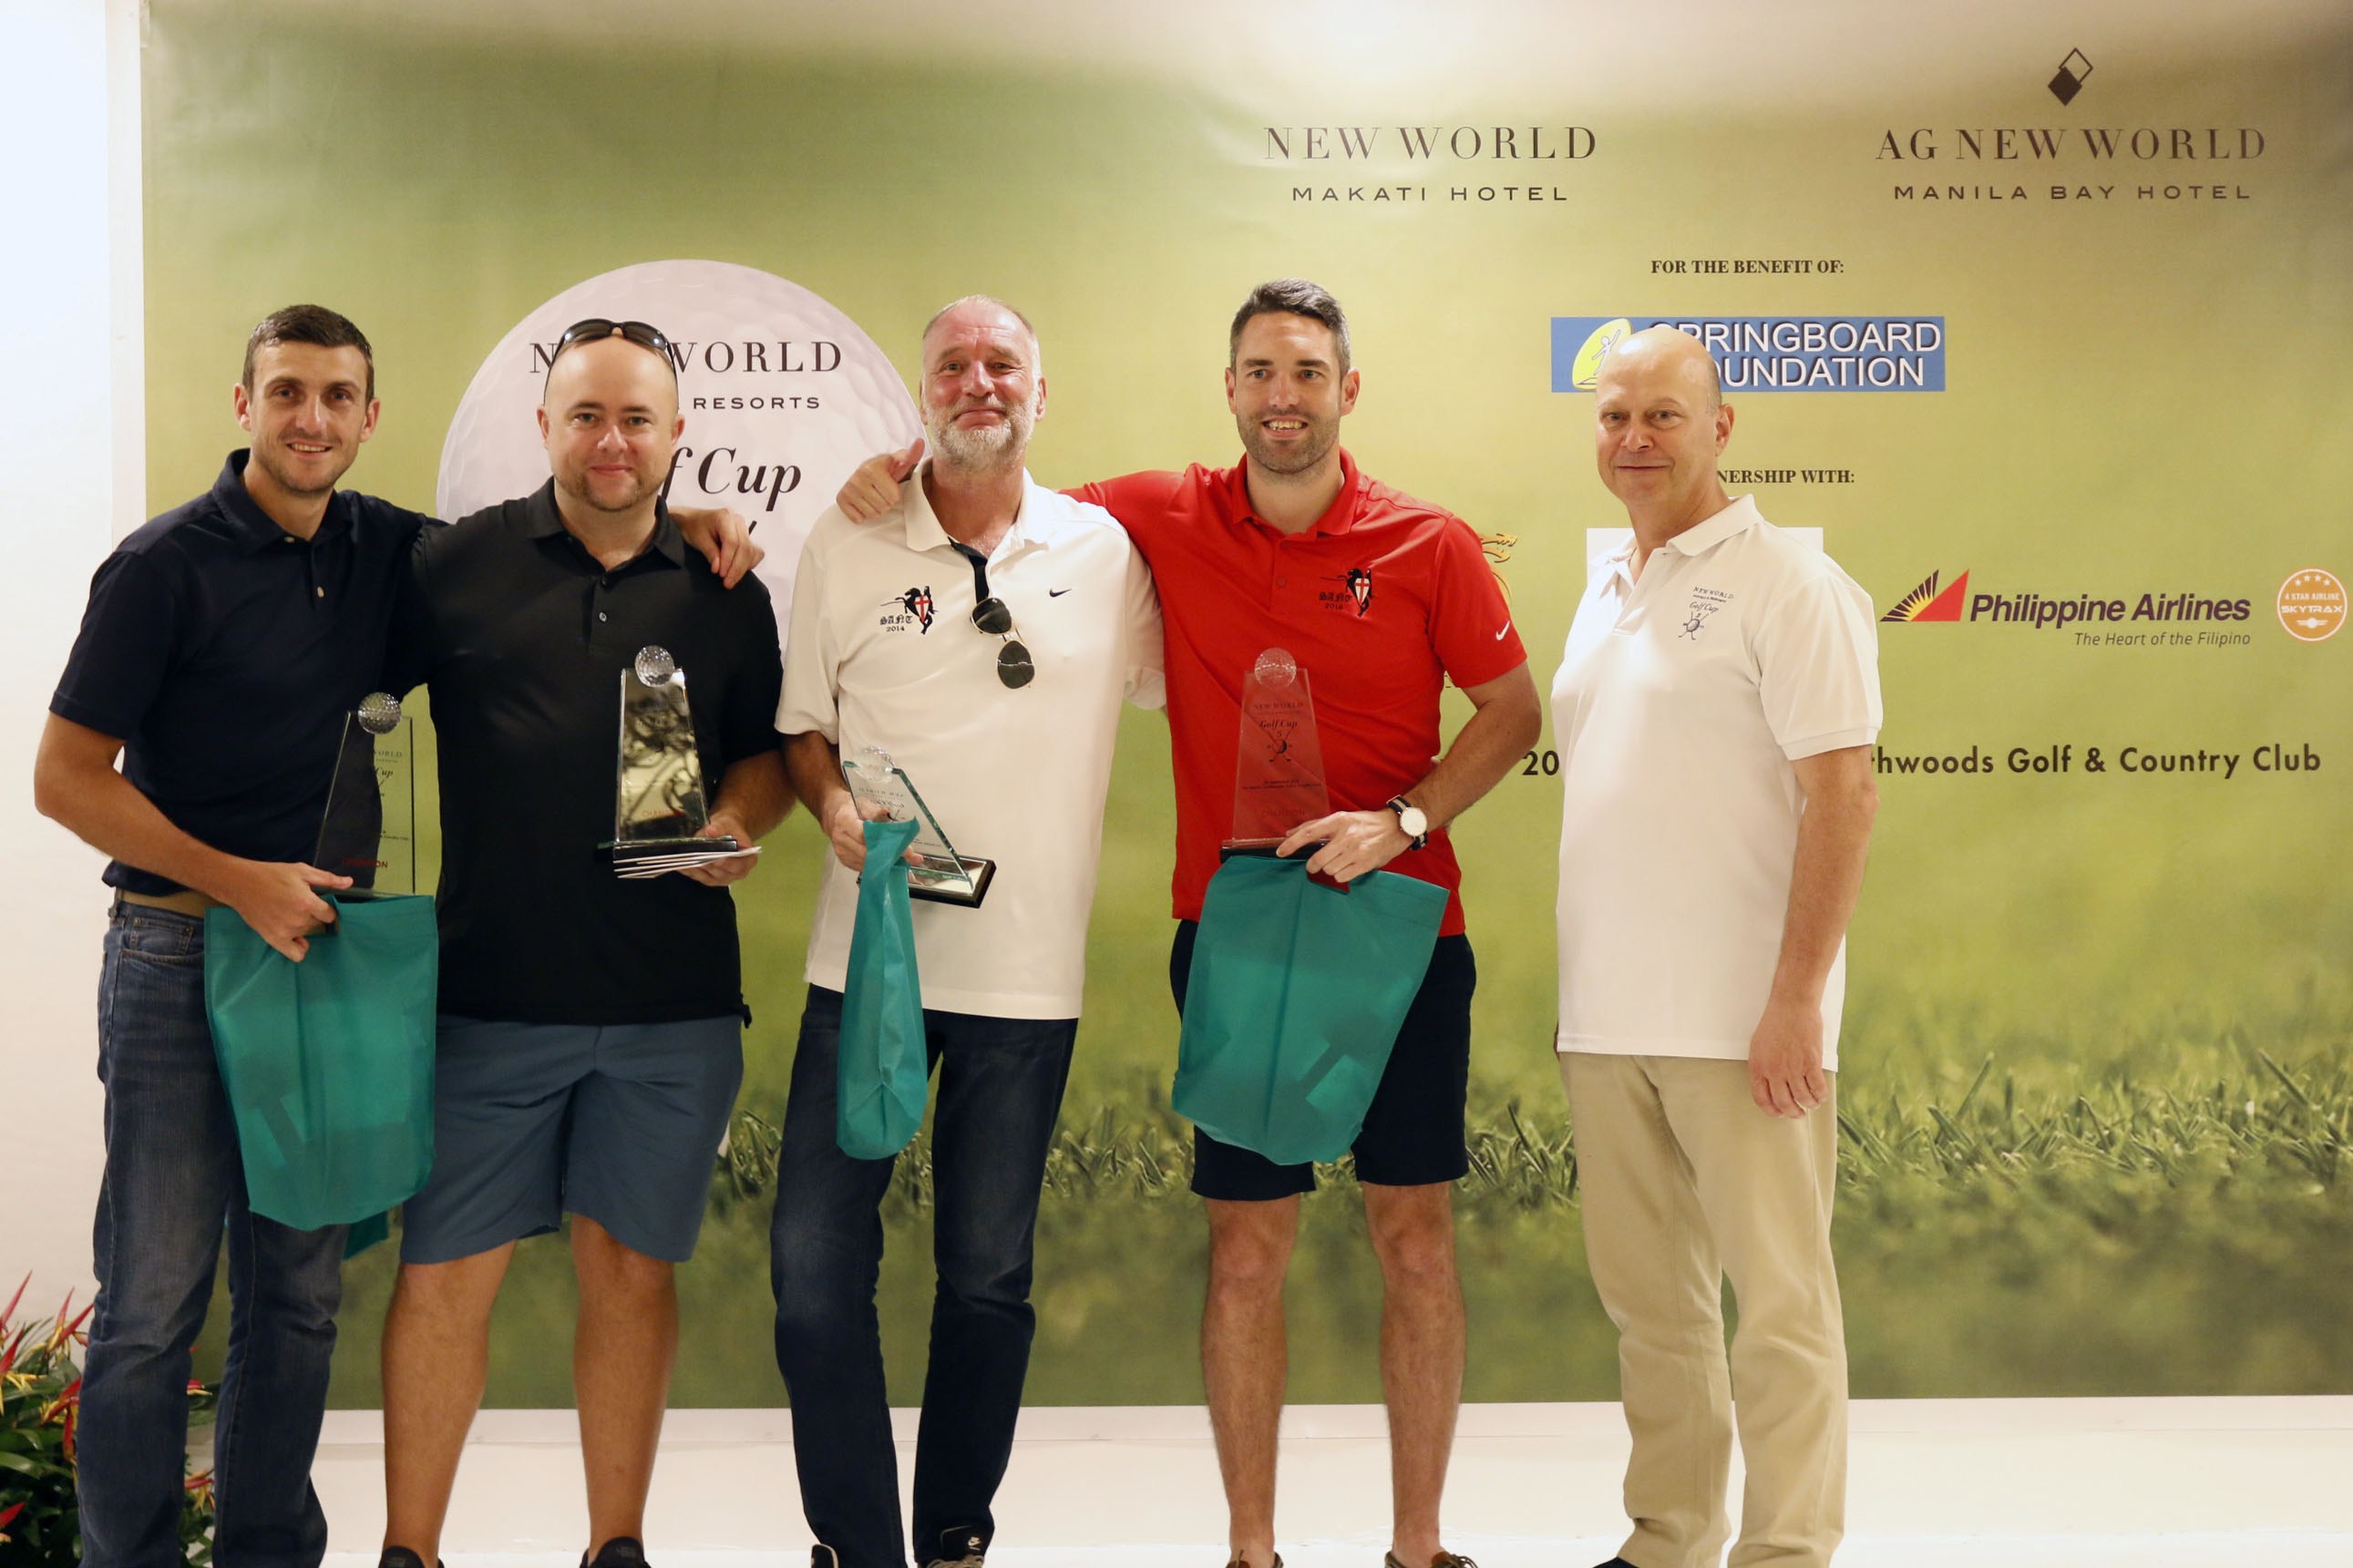 (FROM LEFT) Golf Cup 3 champions Steve Borril, Michael Denison, Tony Kennerly, and Phil Connolly with New World Makati Hotel general manager Farid Schoucair 